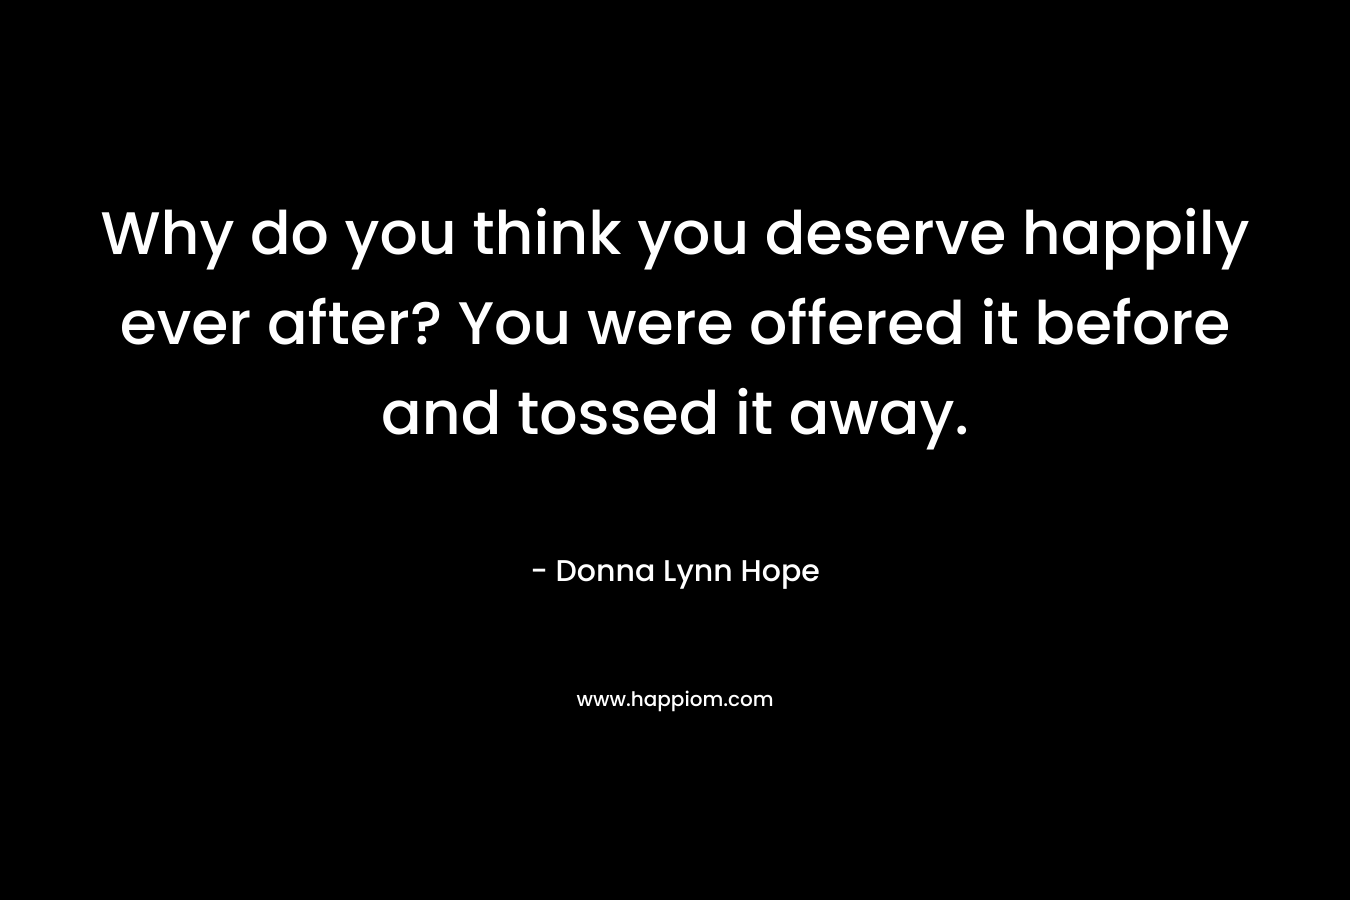 Why do you think you deserve happily ever after? You were offered it before and tossed it away.